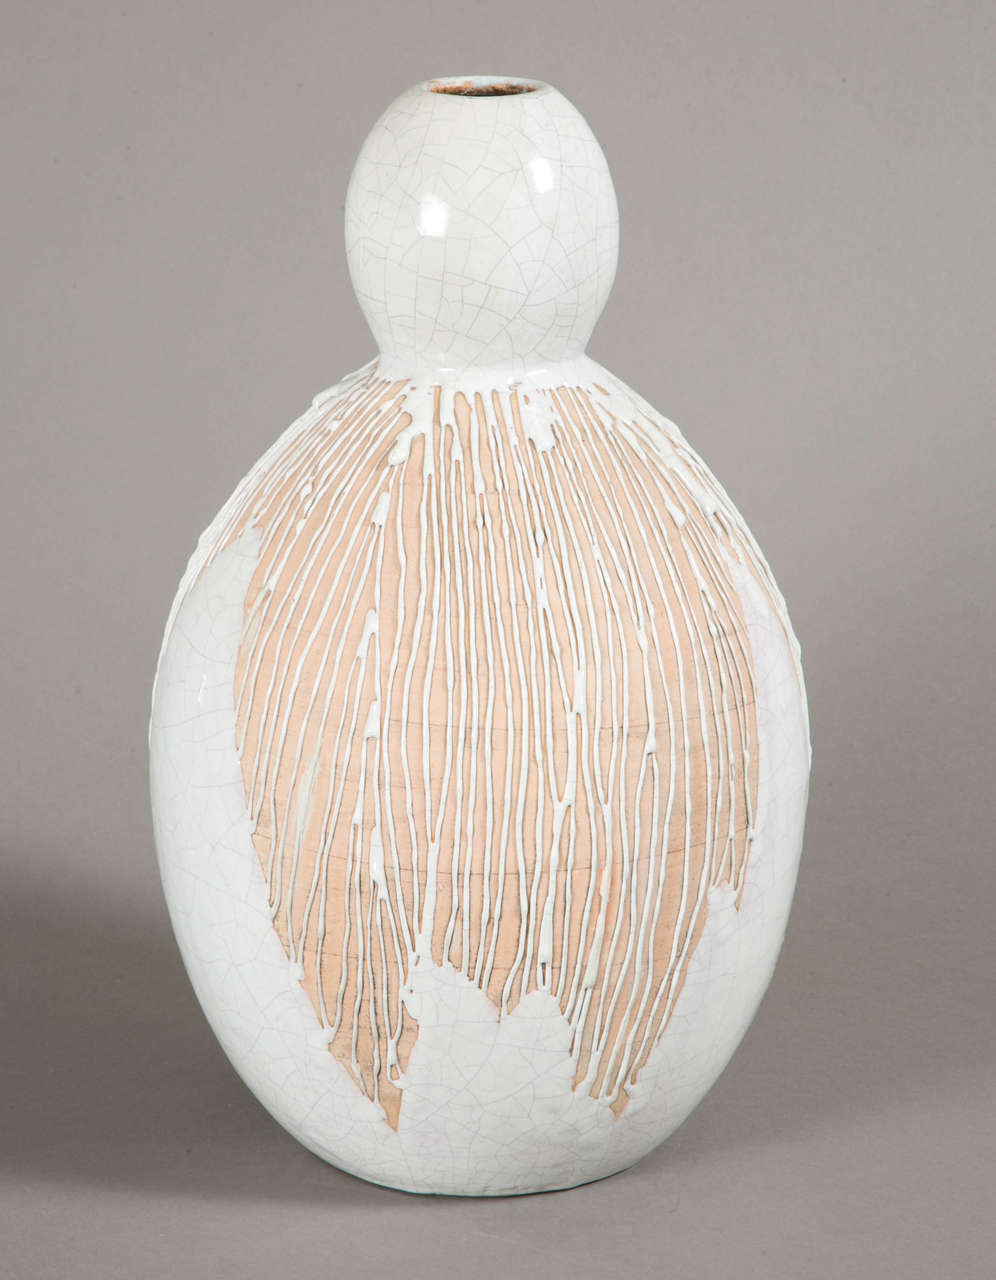 Important white enamelled terracotta bowl vase,  by PRIMAVERA, 1930.
Atelier du Printemps
with white round neck, crackeled rays and drops on light stoneware ground.
Signed Primavera, Made in France, numbered.